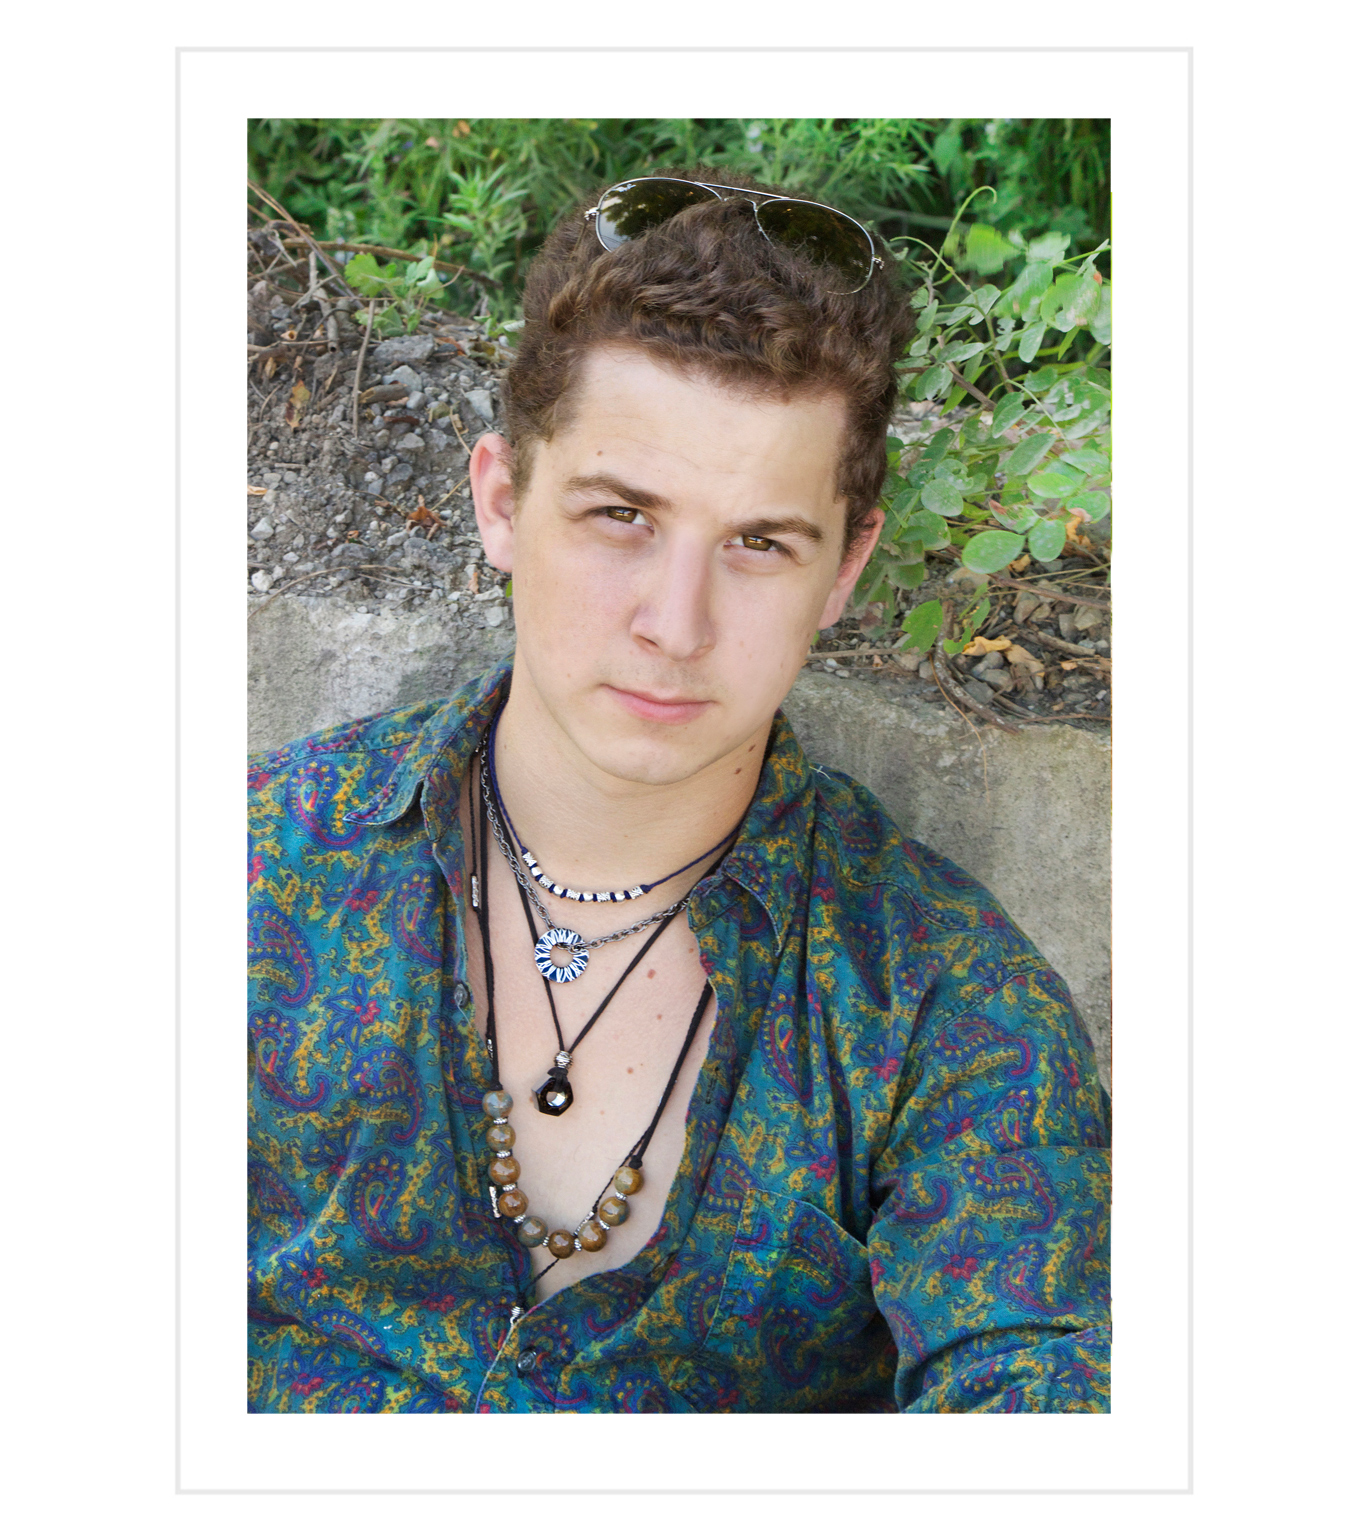 men's necklace collection by Quiet Lion Creations. Model credit: Bobby Cooling